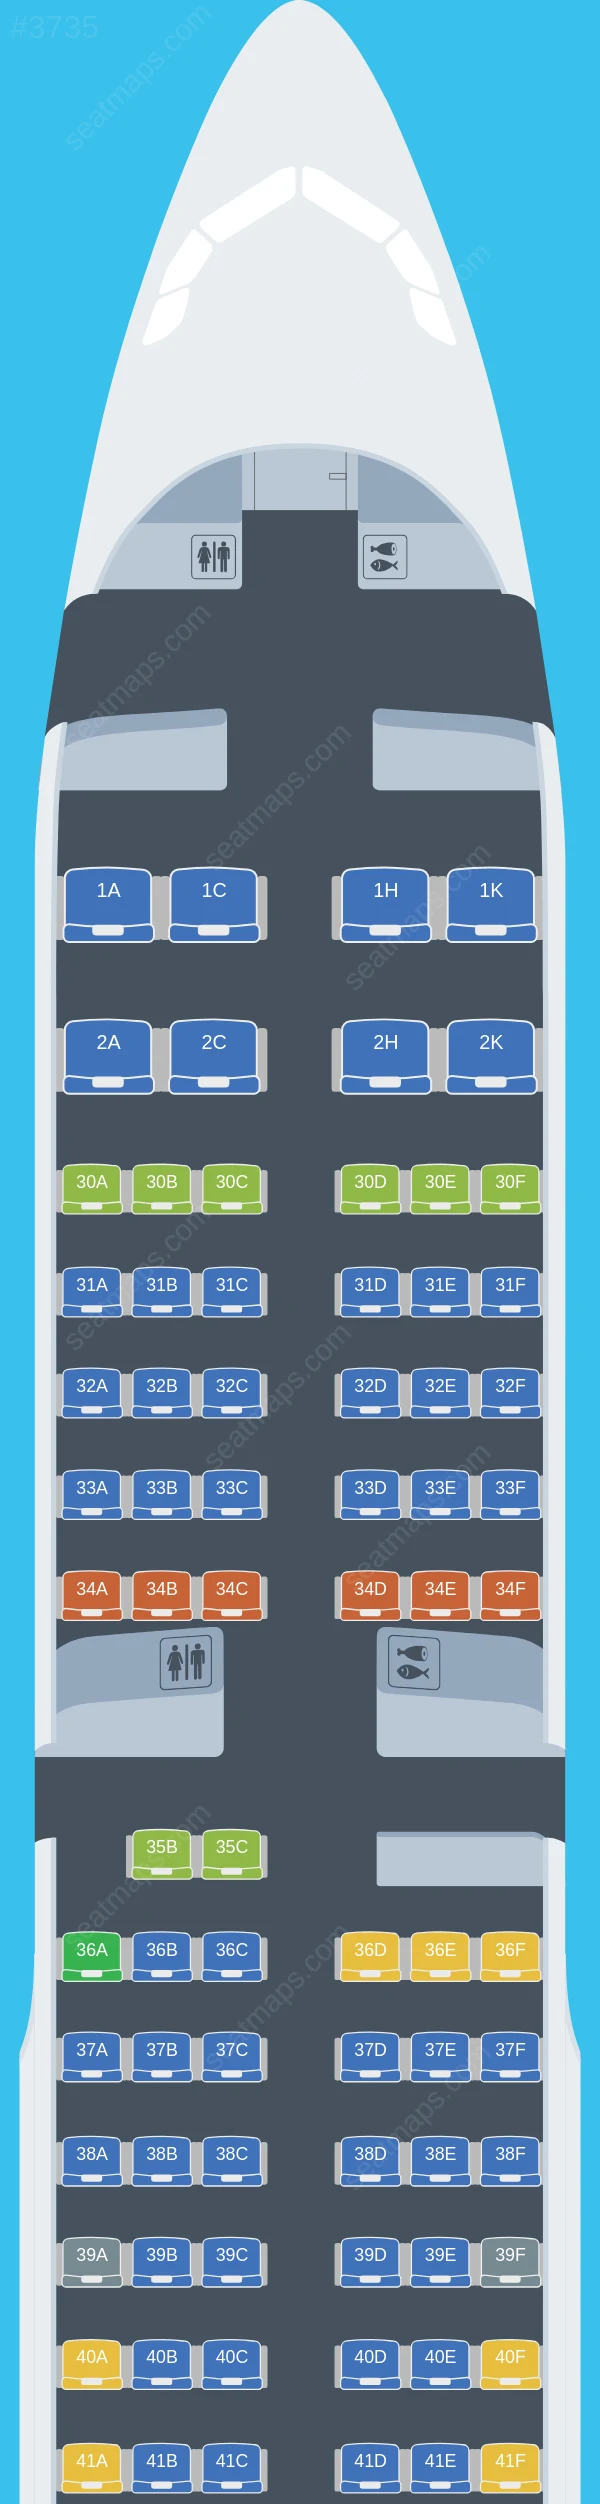 Sichuan Airlines Airbus A321-200 V.1 seatmap preview